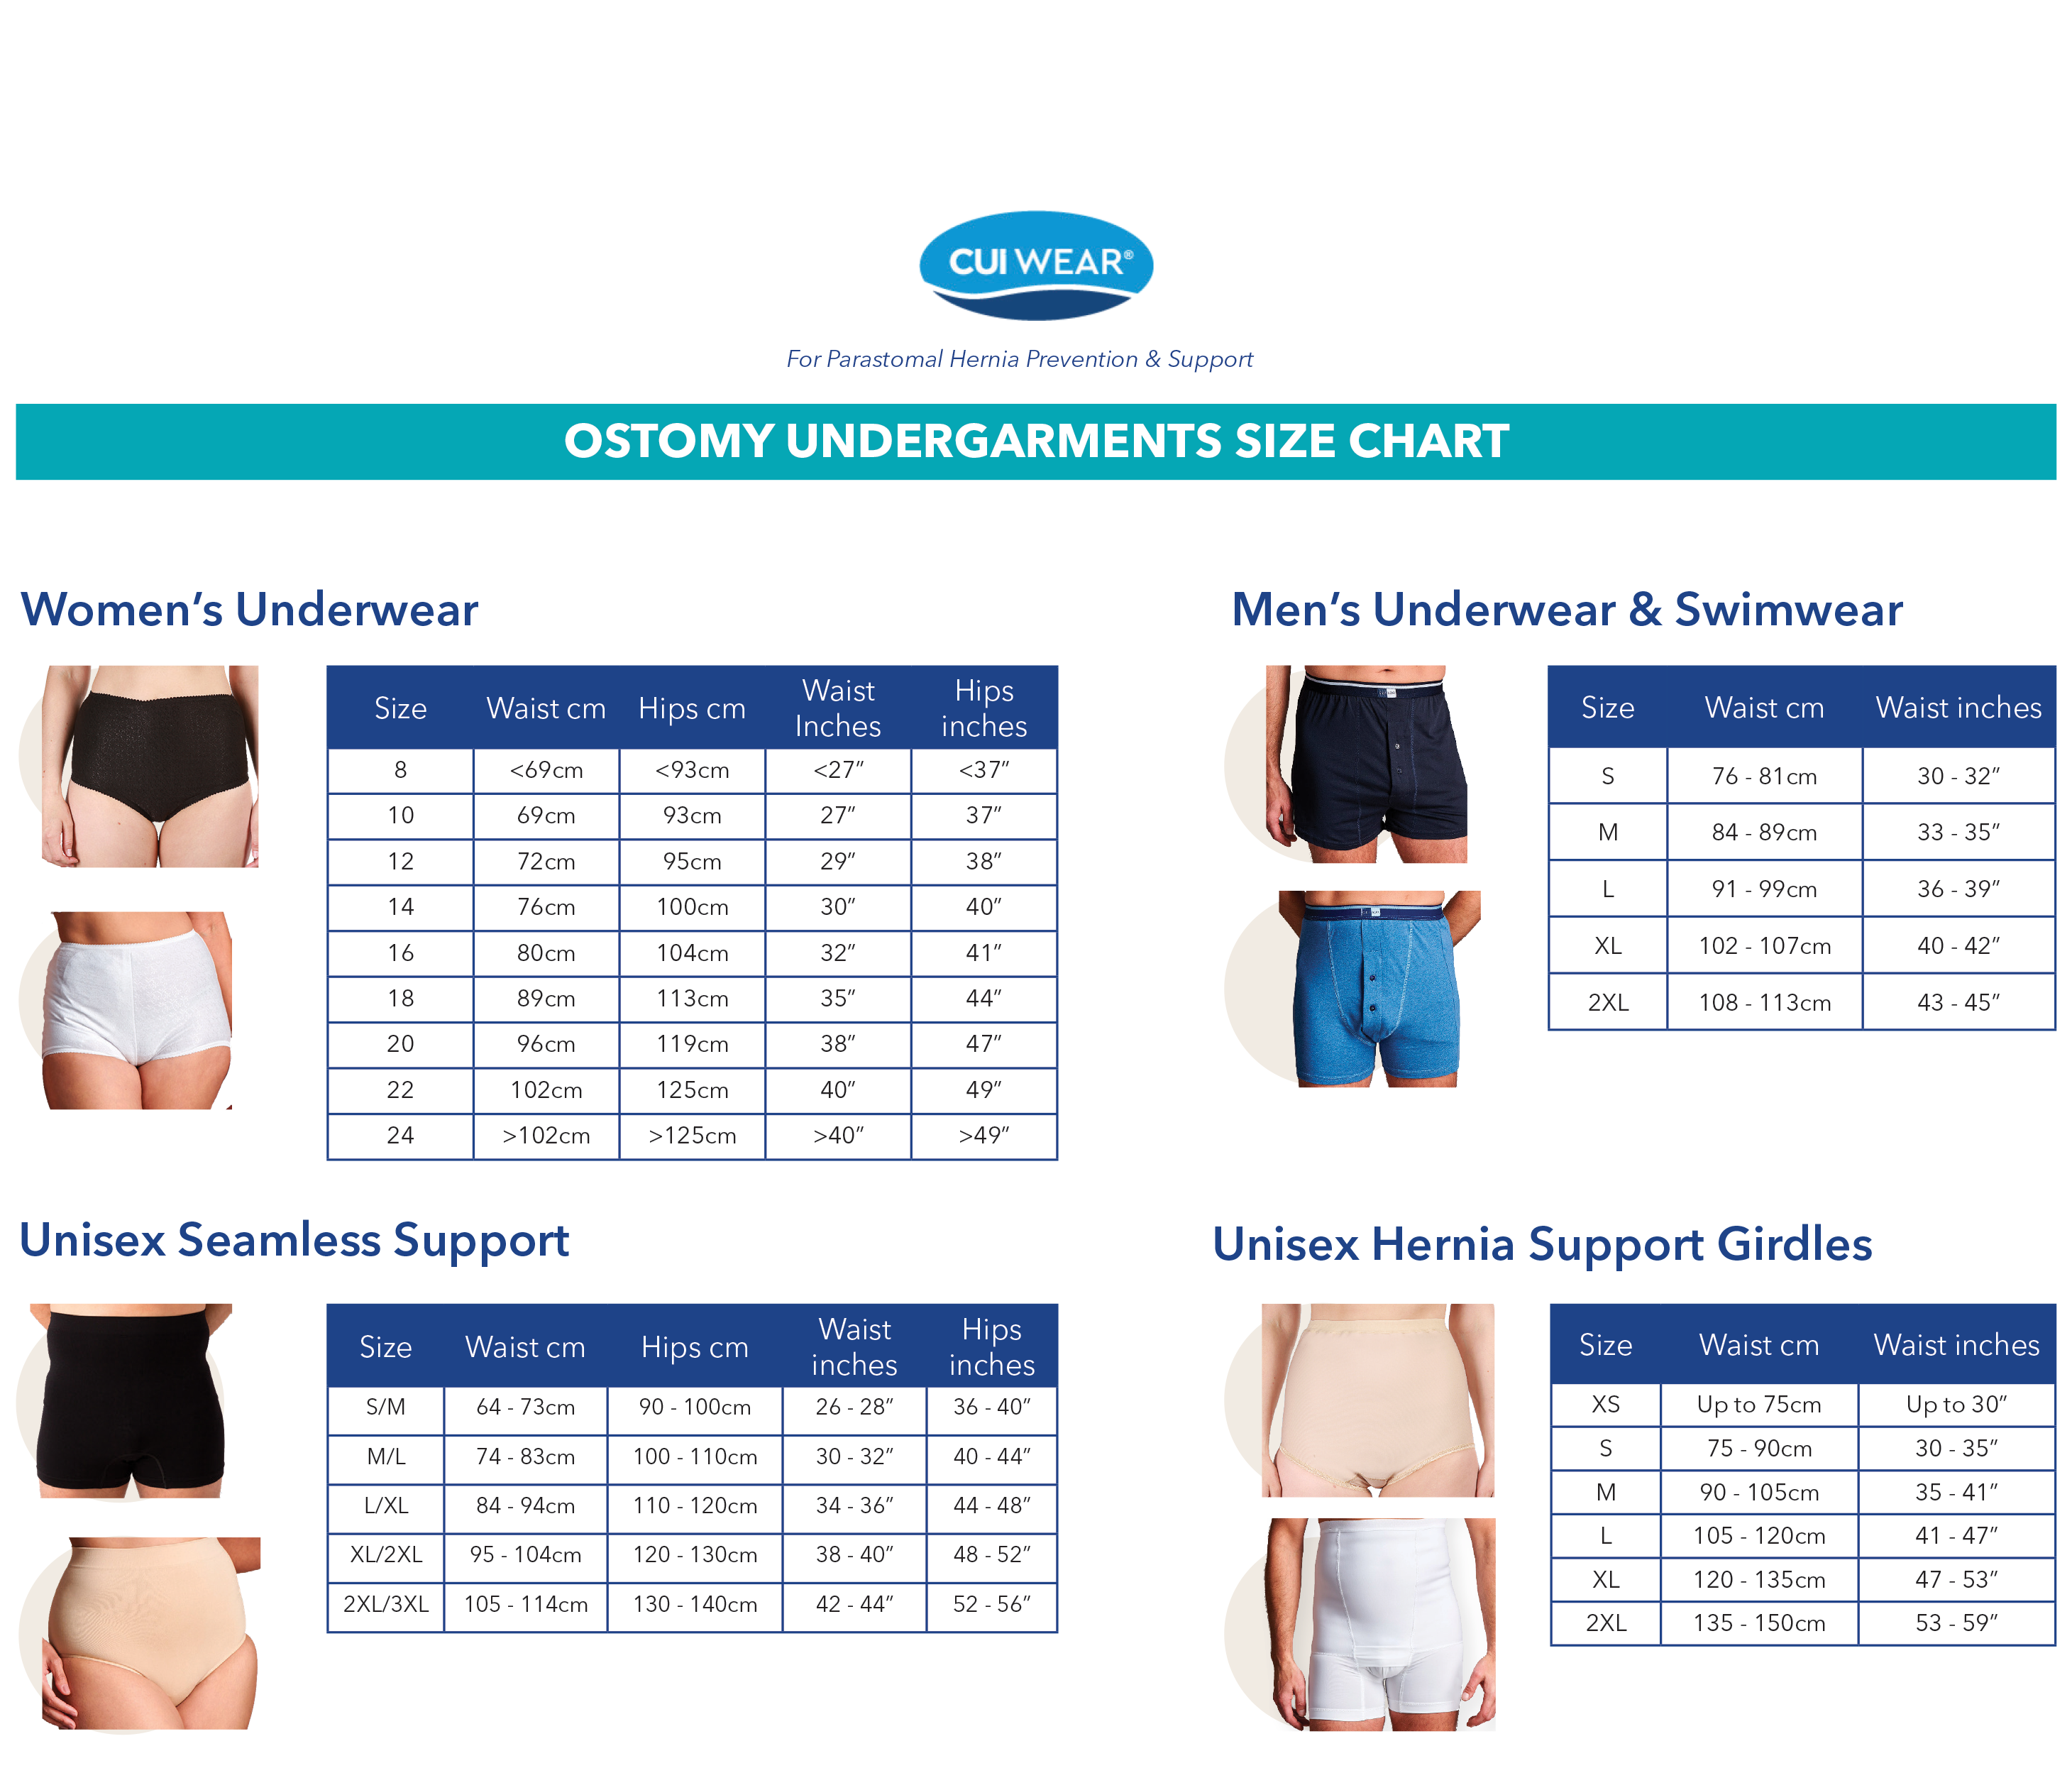 CUI Mens Hernia Low Waist Support Girdle With Legs - 1 each, XSMALL, BLACK